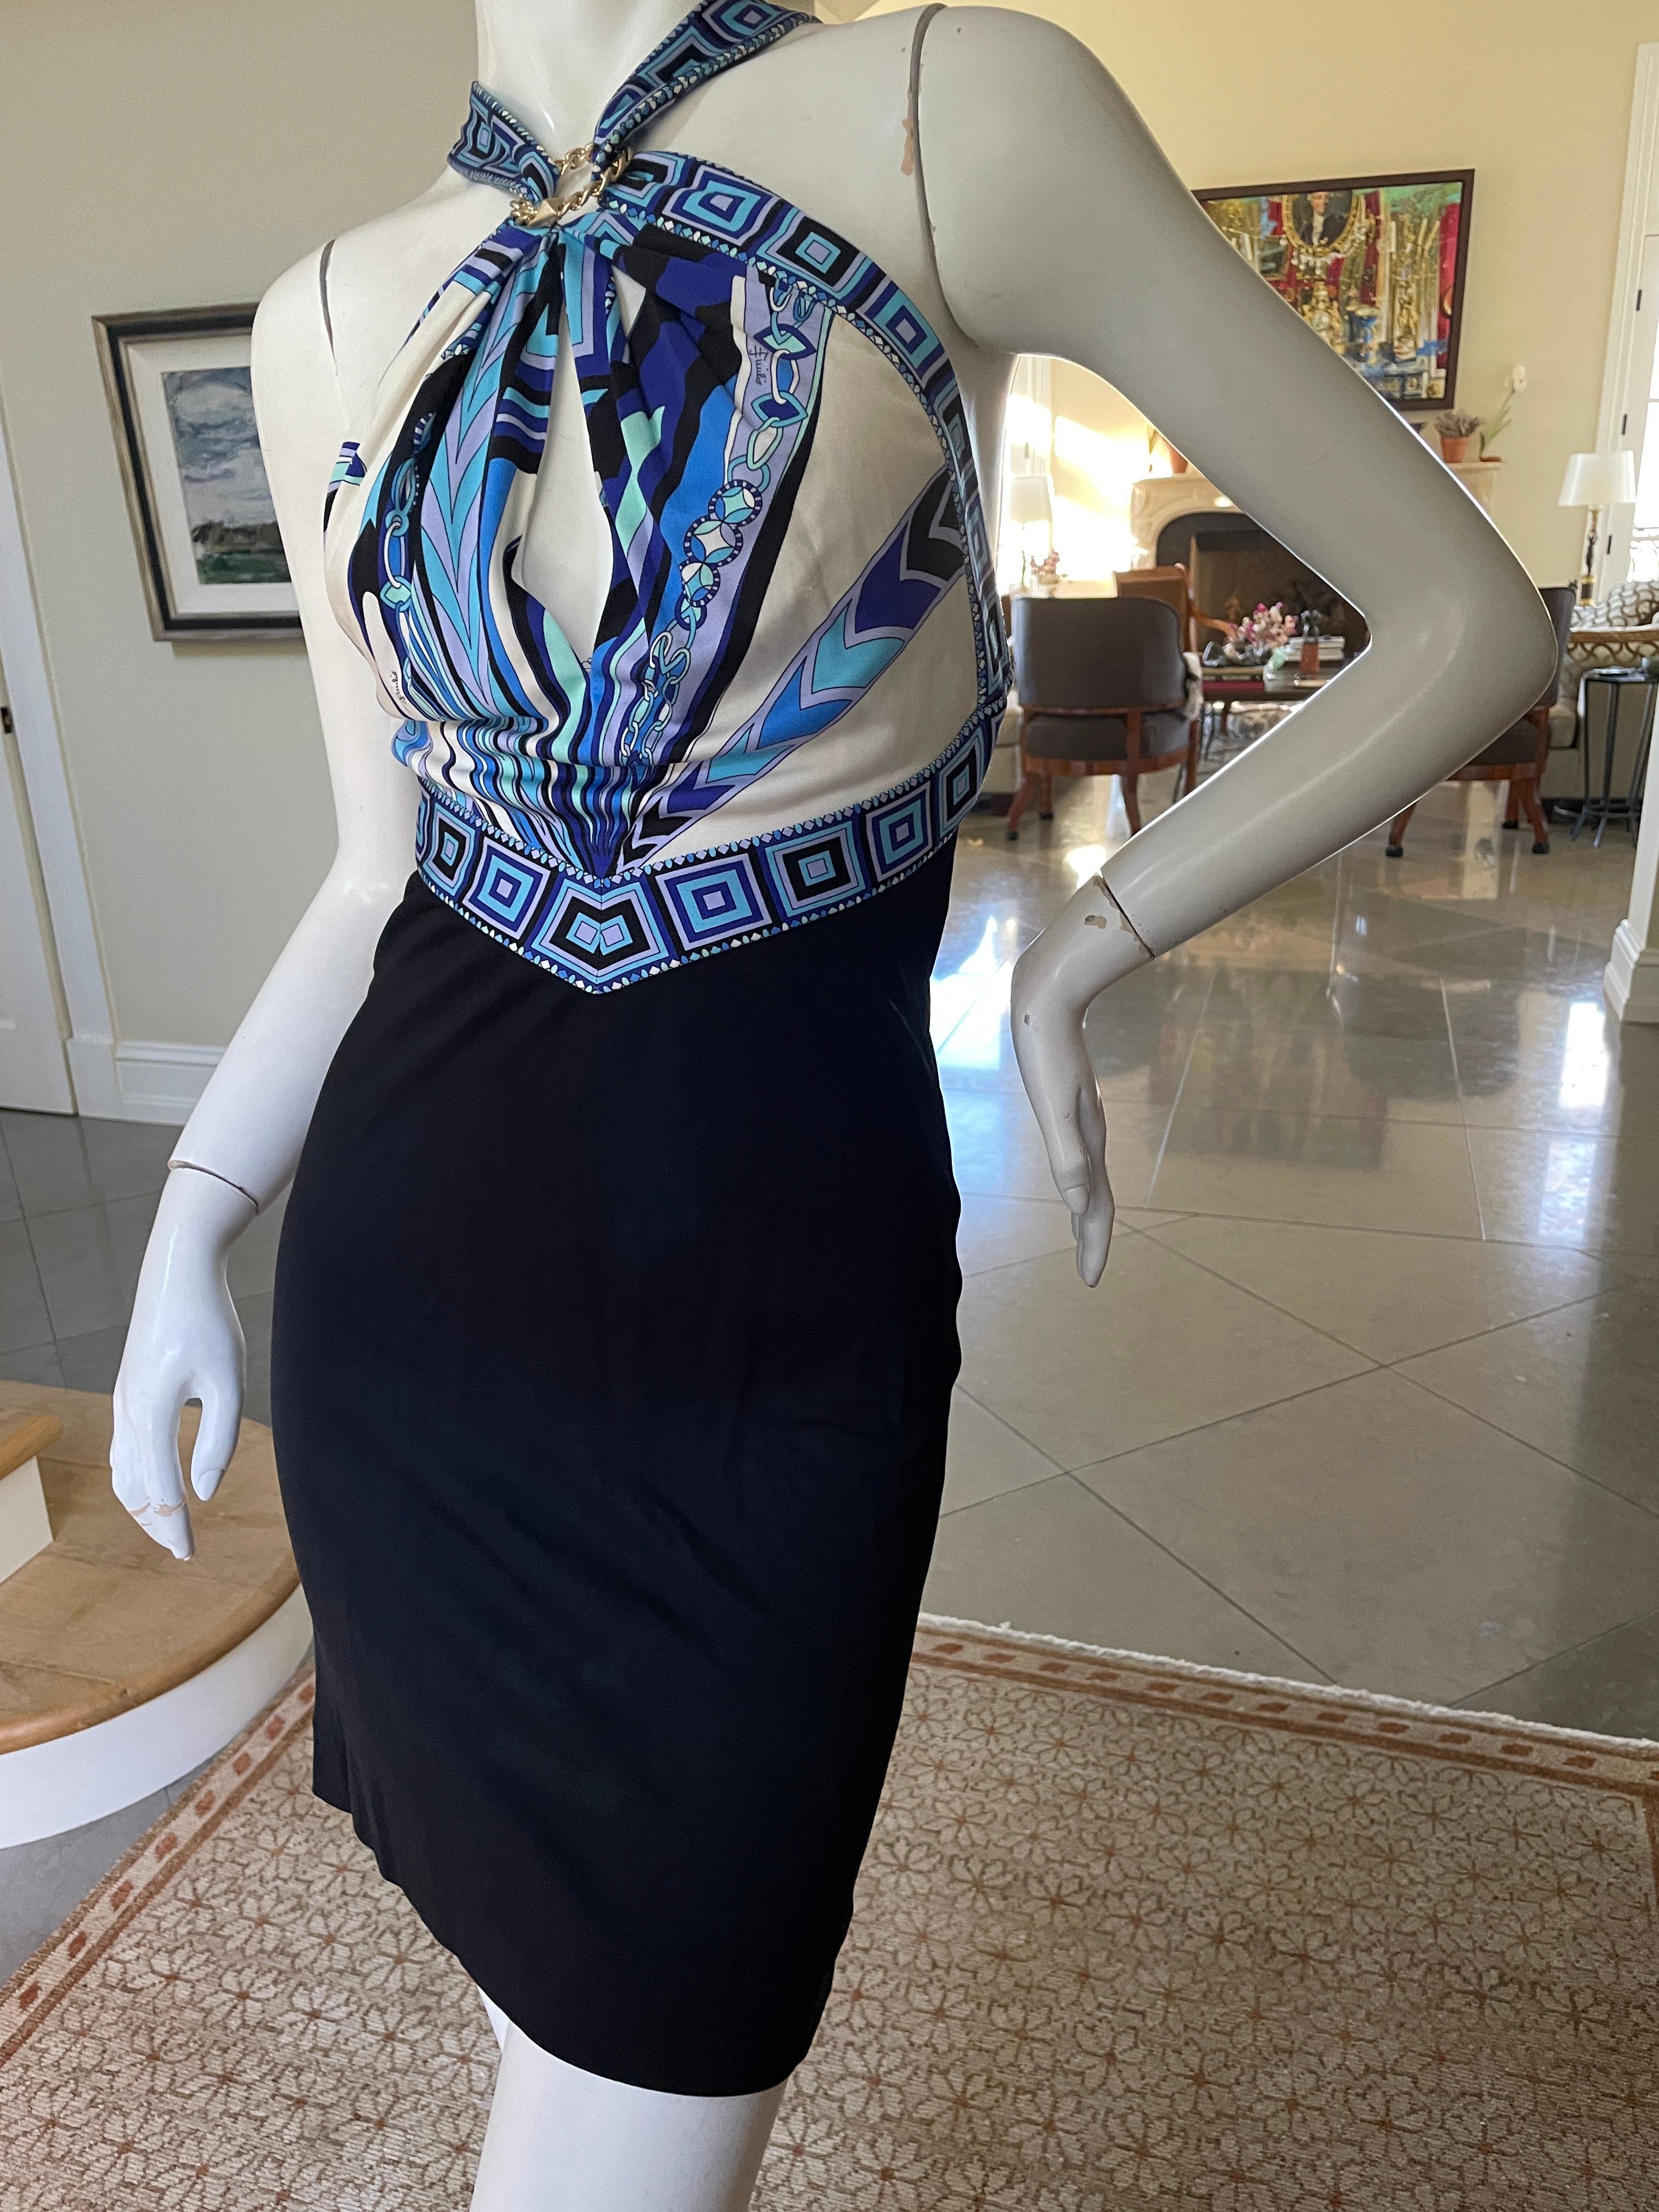 Black Emilio Pucci Halter Style Vintage Racer Back Mini Dress with Peek a Boo Keyhole For Sale